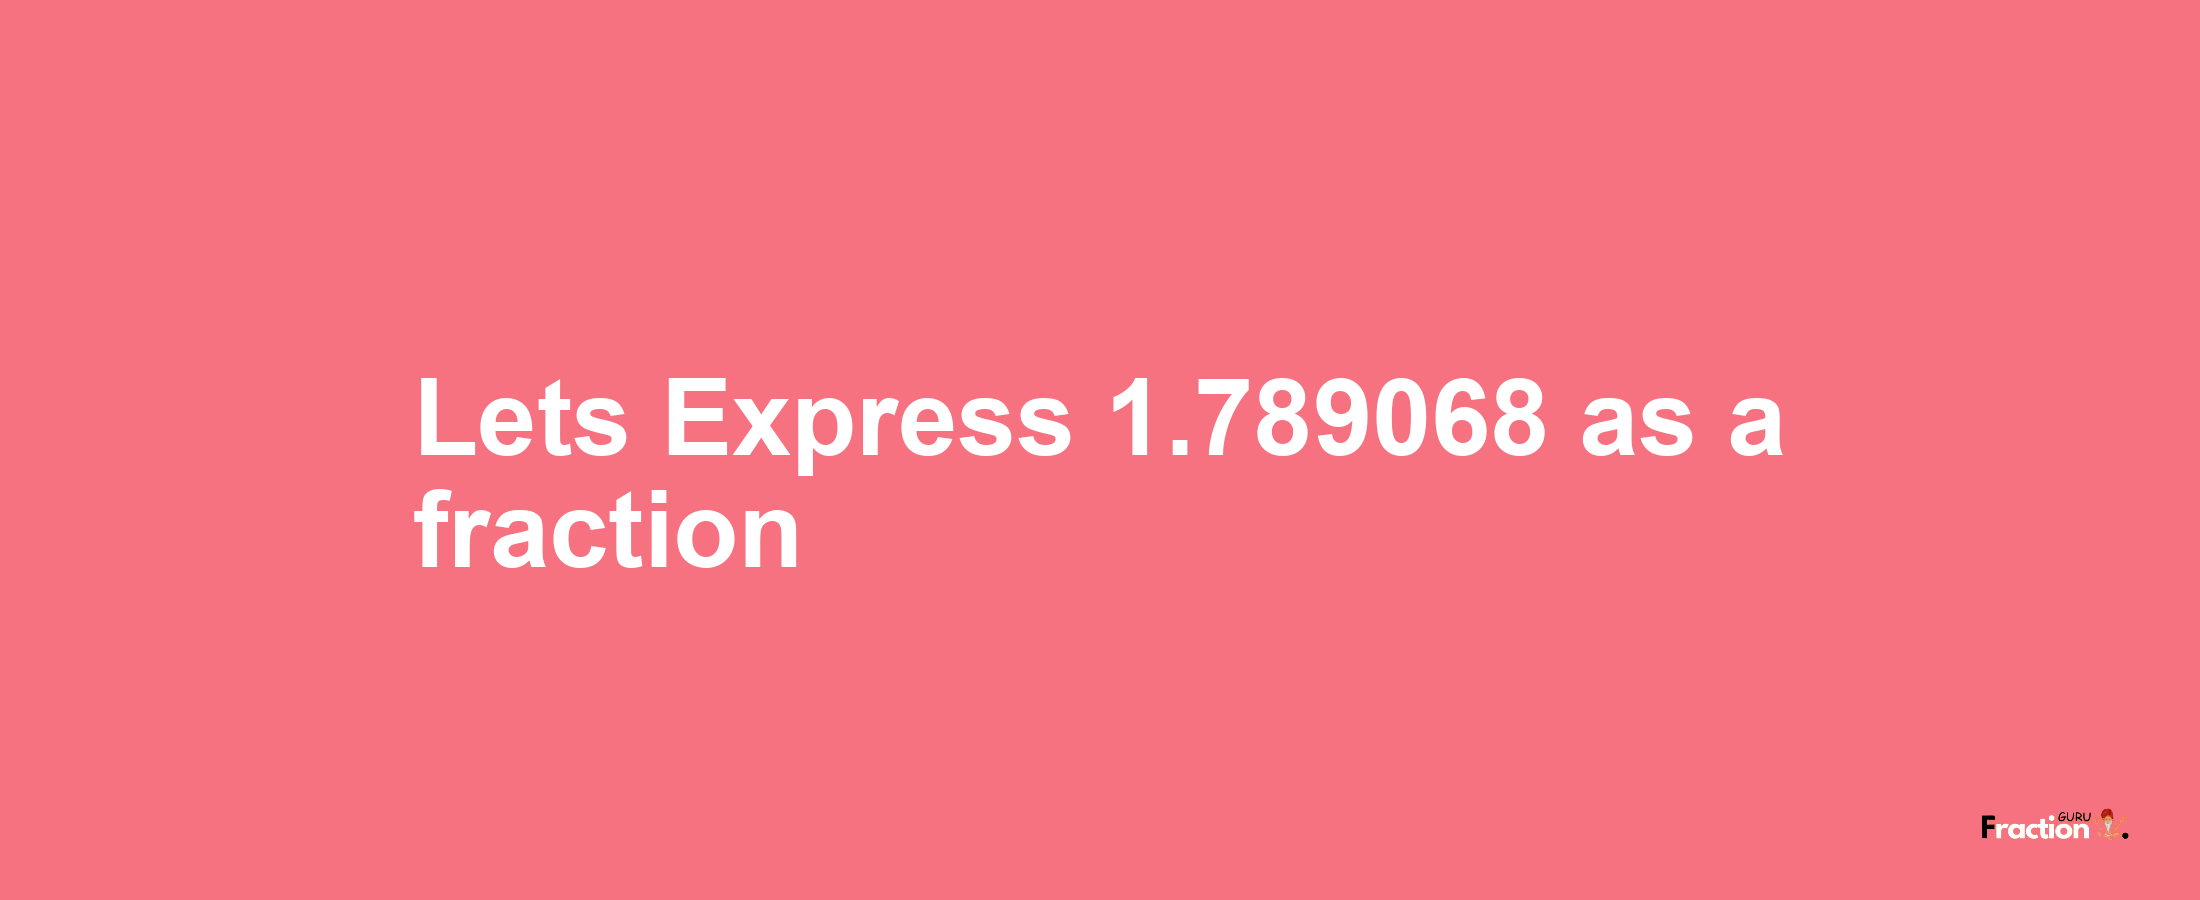 Lets Express 1.789068 as afraction